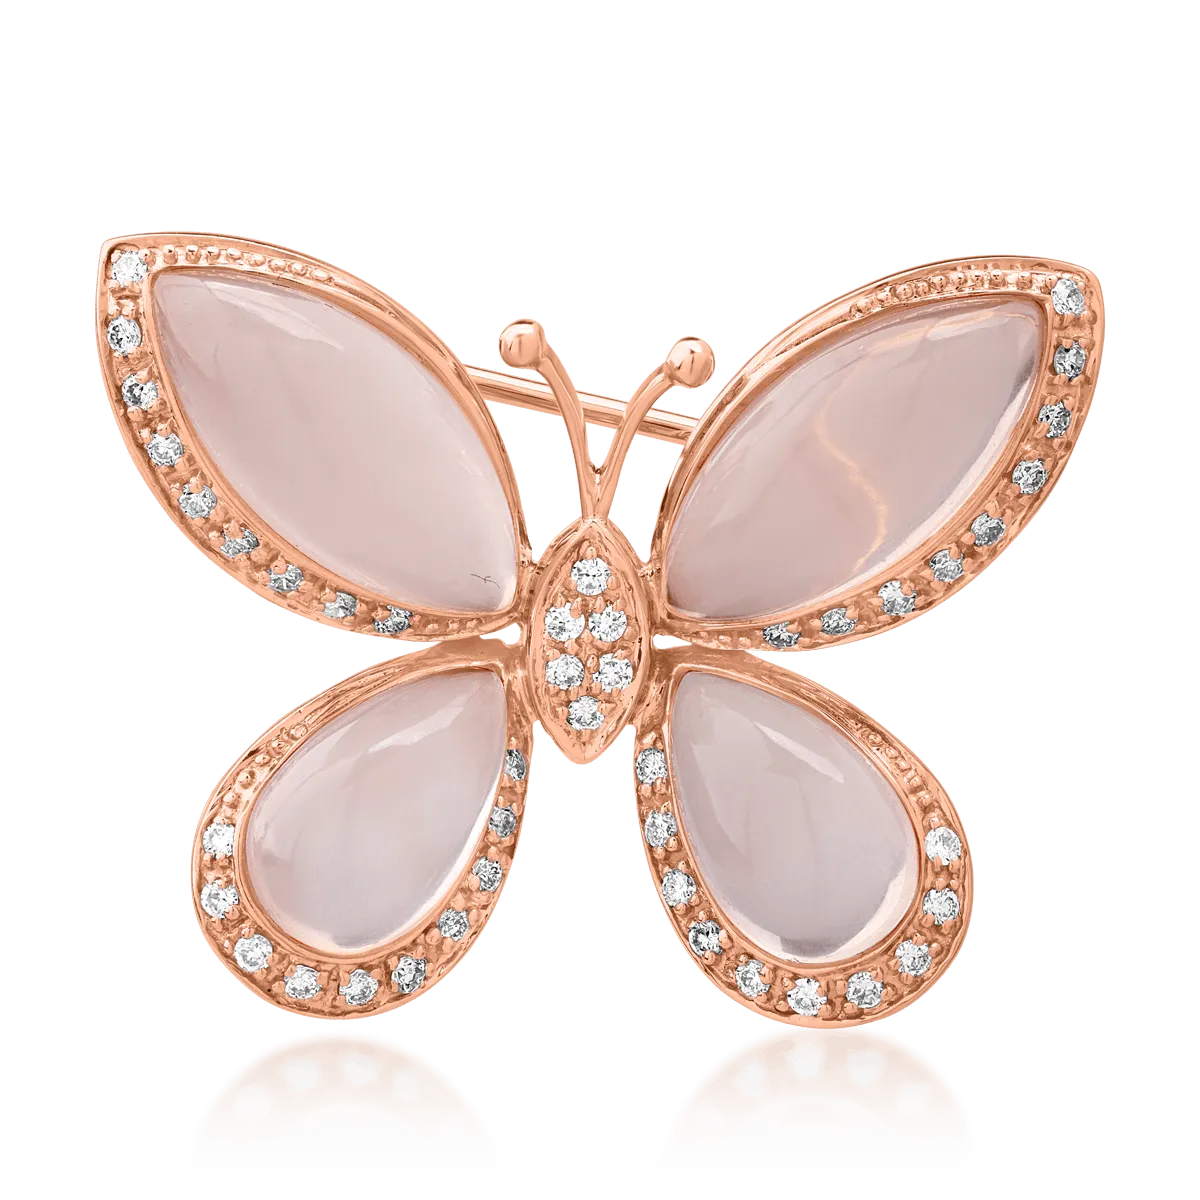 18K rose gold brooch with 13.646ct rose quartz and 0.334ct diamonds